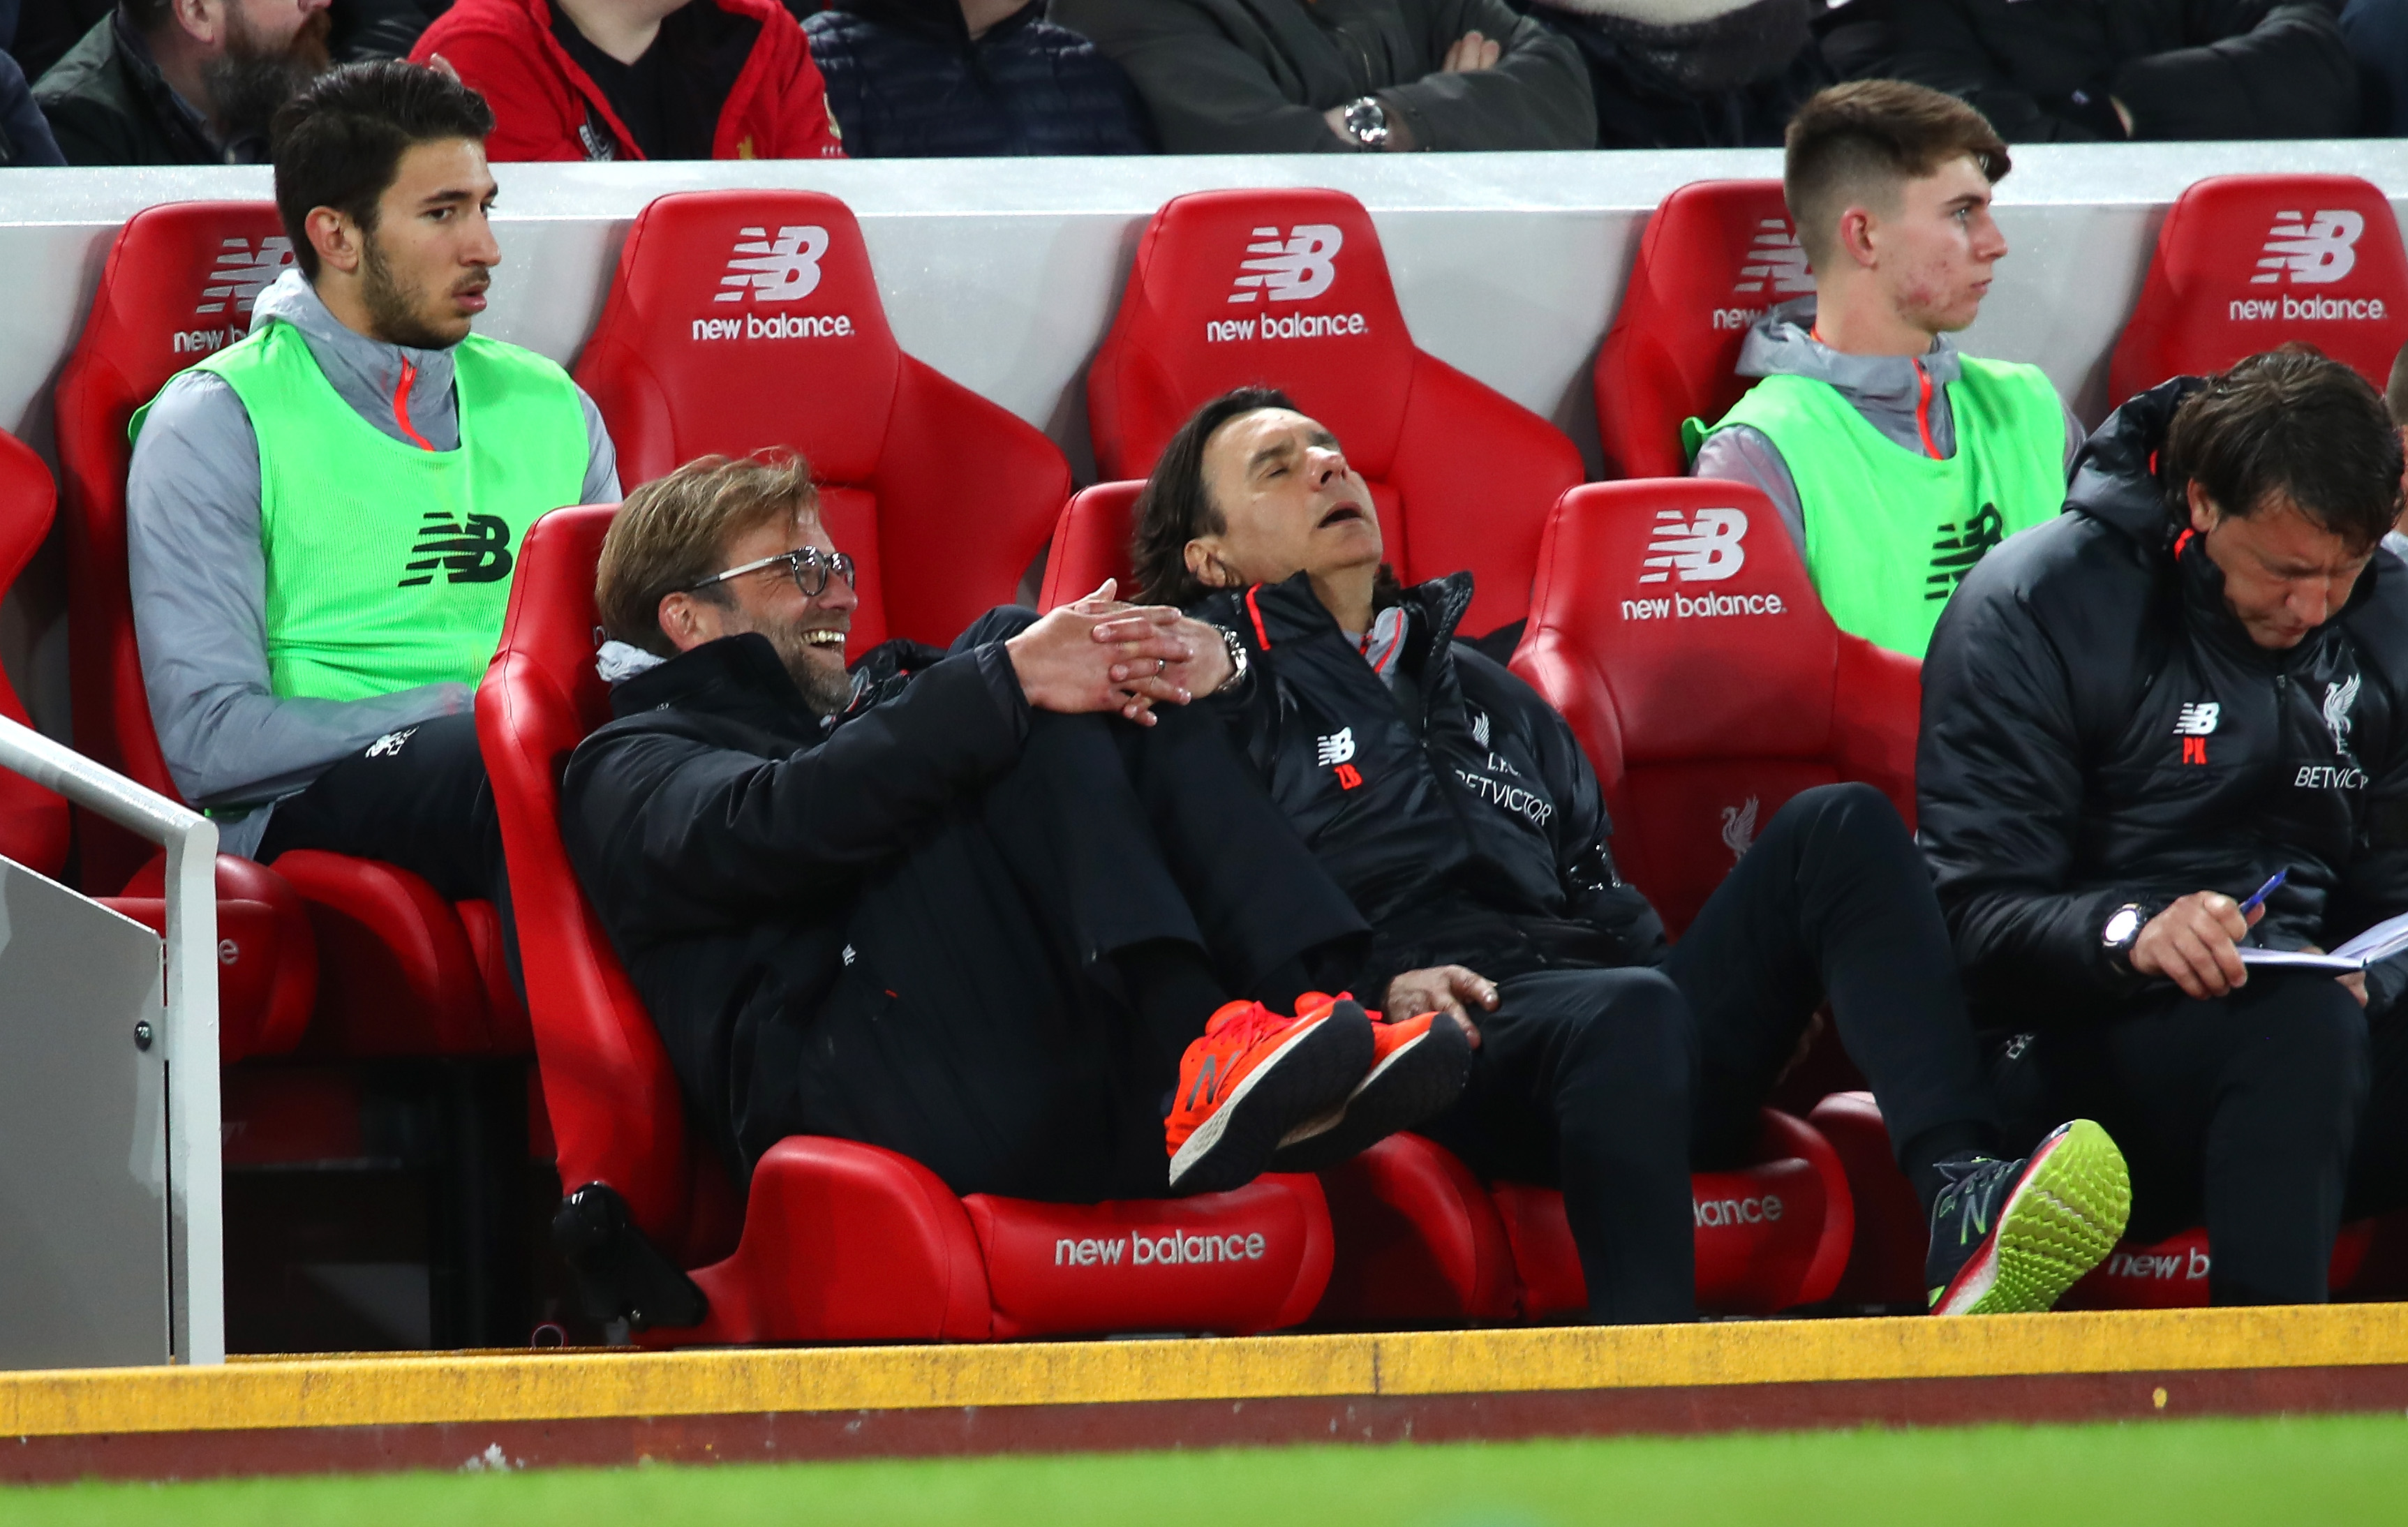 LIVERPOOL, ENGLAND - APRIL 05: Jurgen Klopp, Manager of Liverpool reacts during the Premier League match between Liverpool and AFC Bournemouth at Anfield on April 5, 2017 in Liverpool, England.  (Photo by Clive Brunskill/Getty Images)